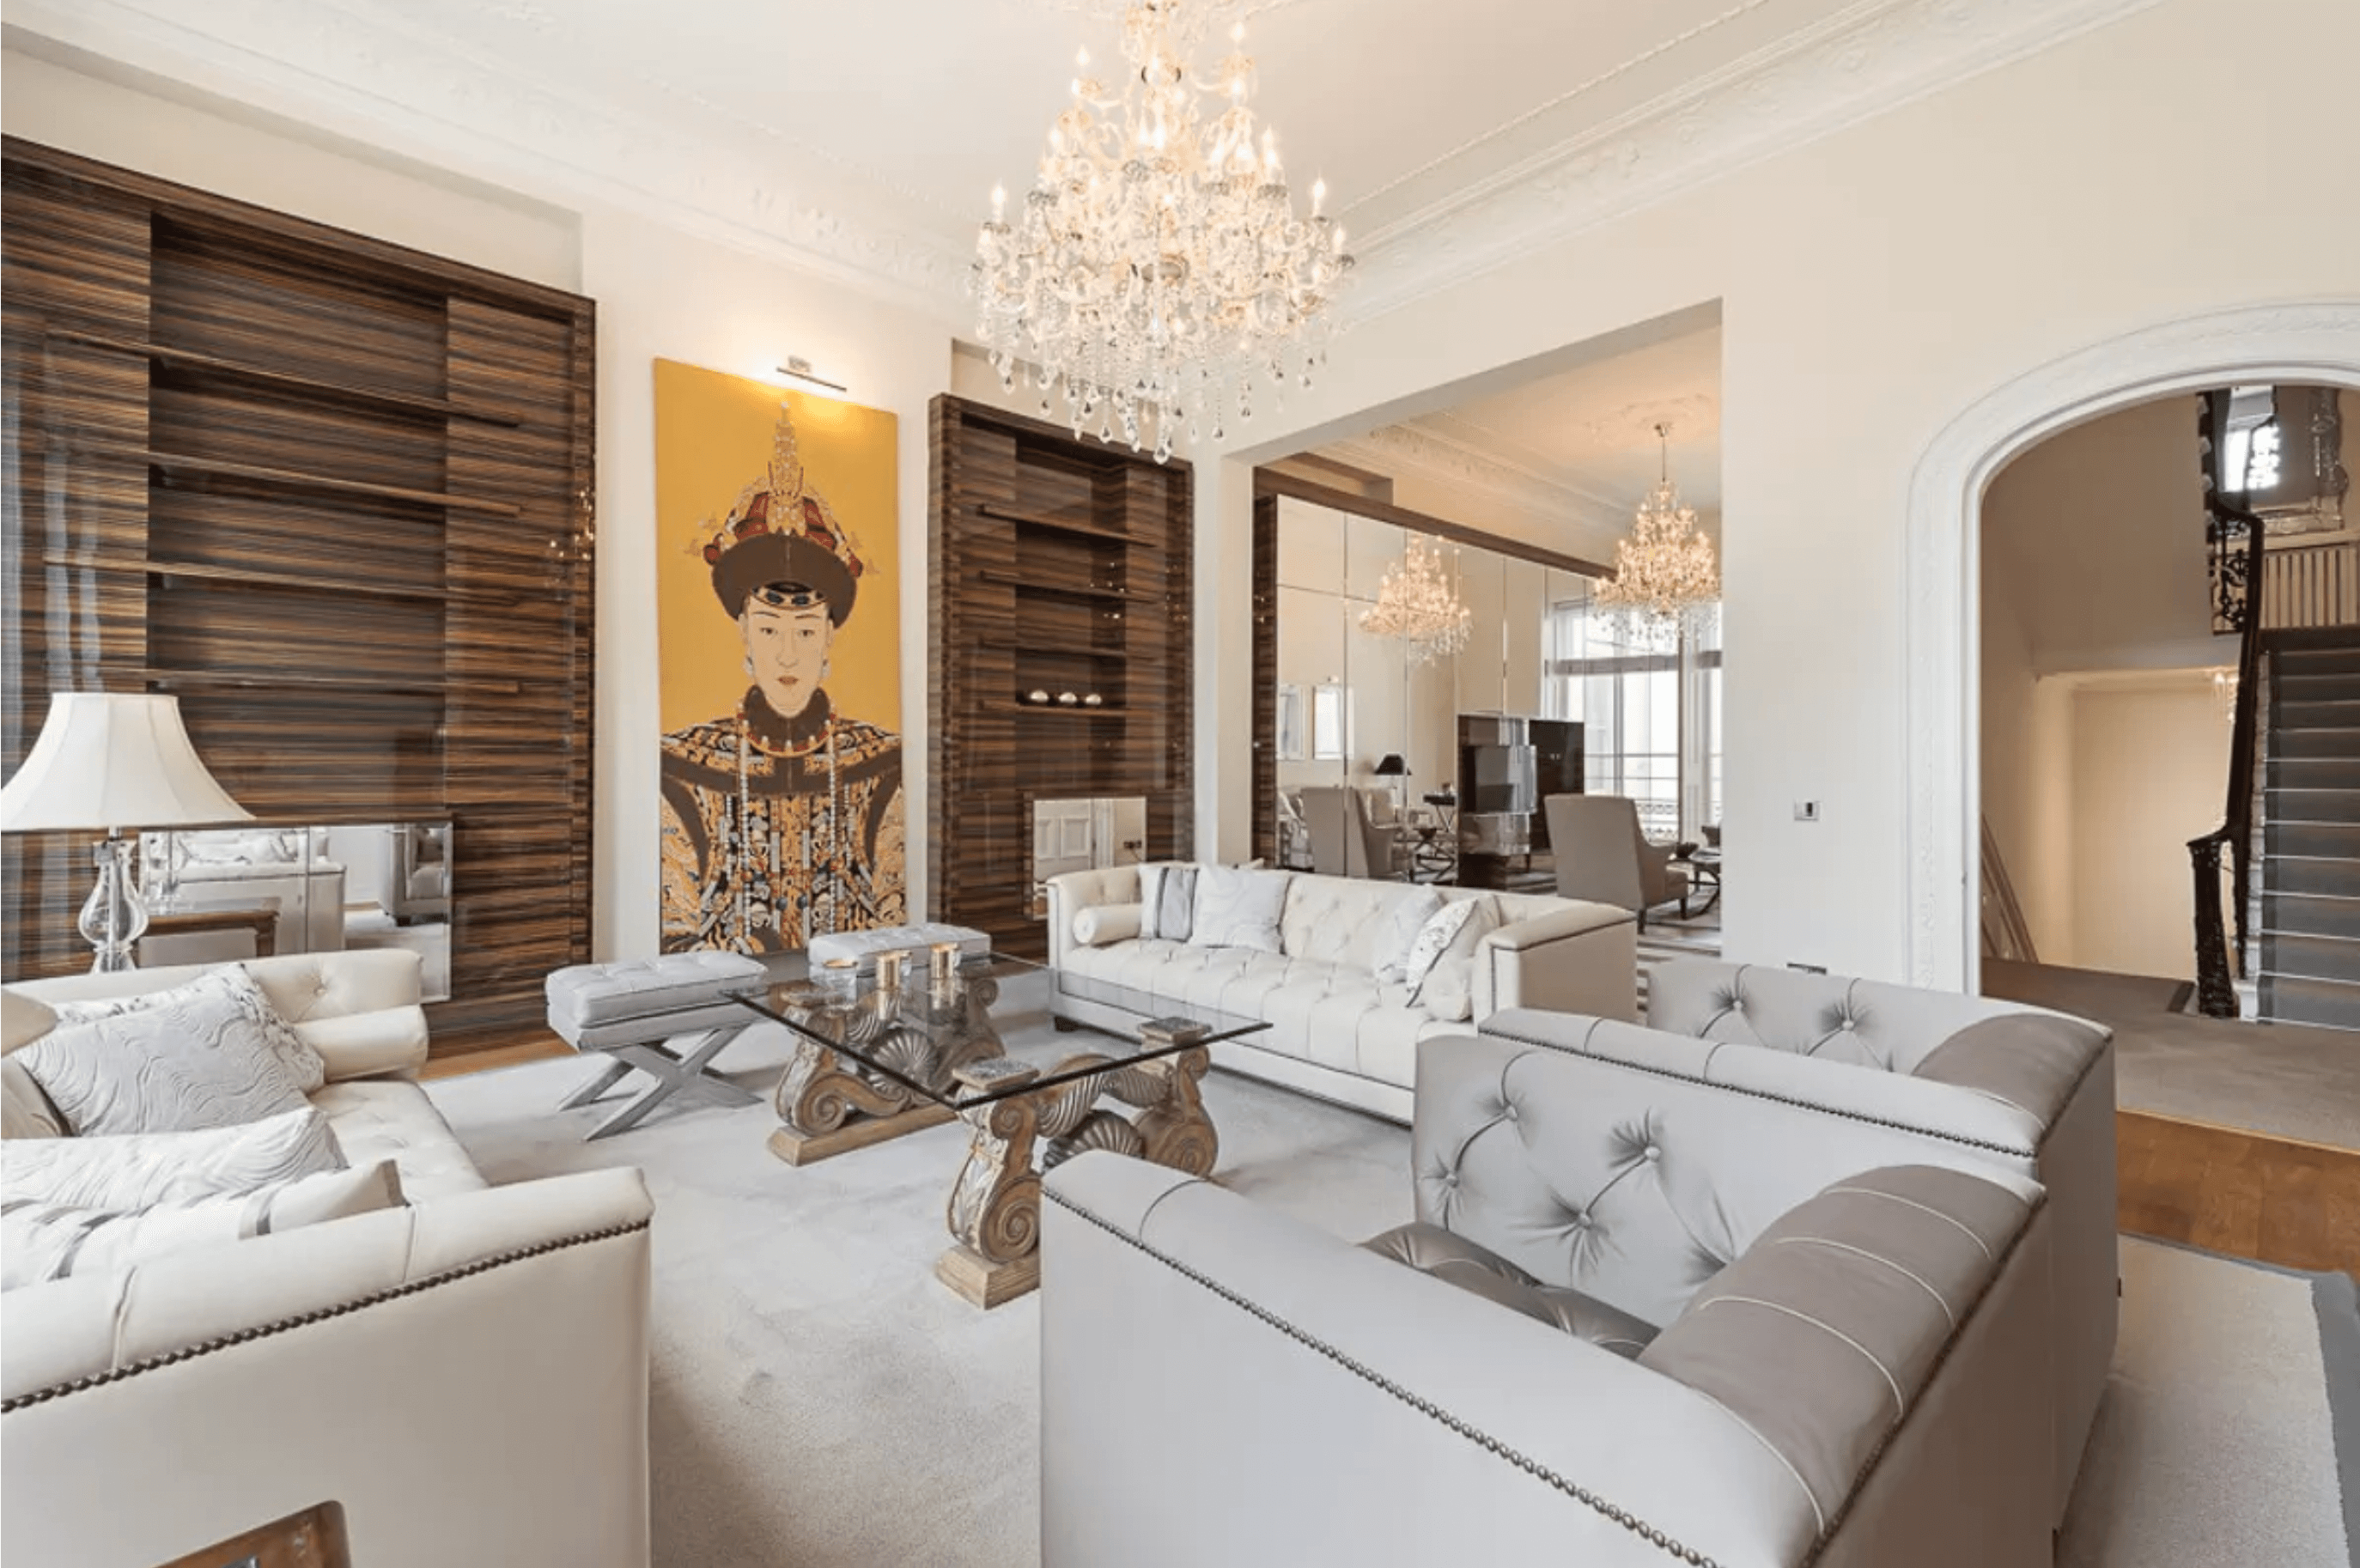 7 Bedroom house in one of Knightsbridge's most exclusive streets